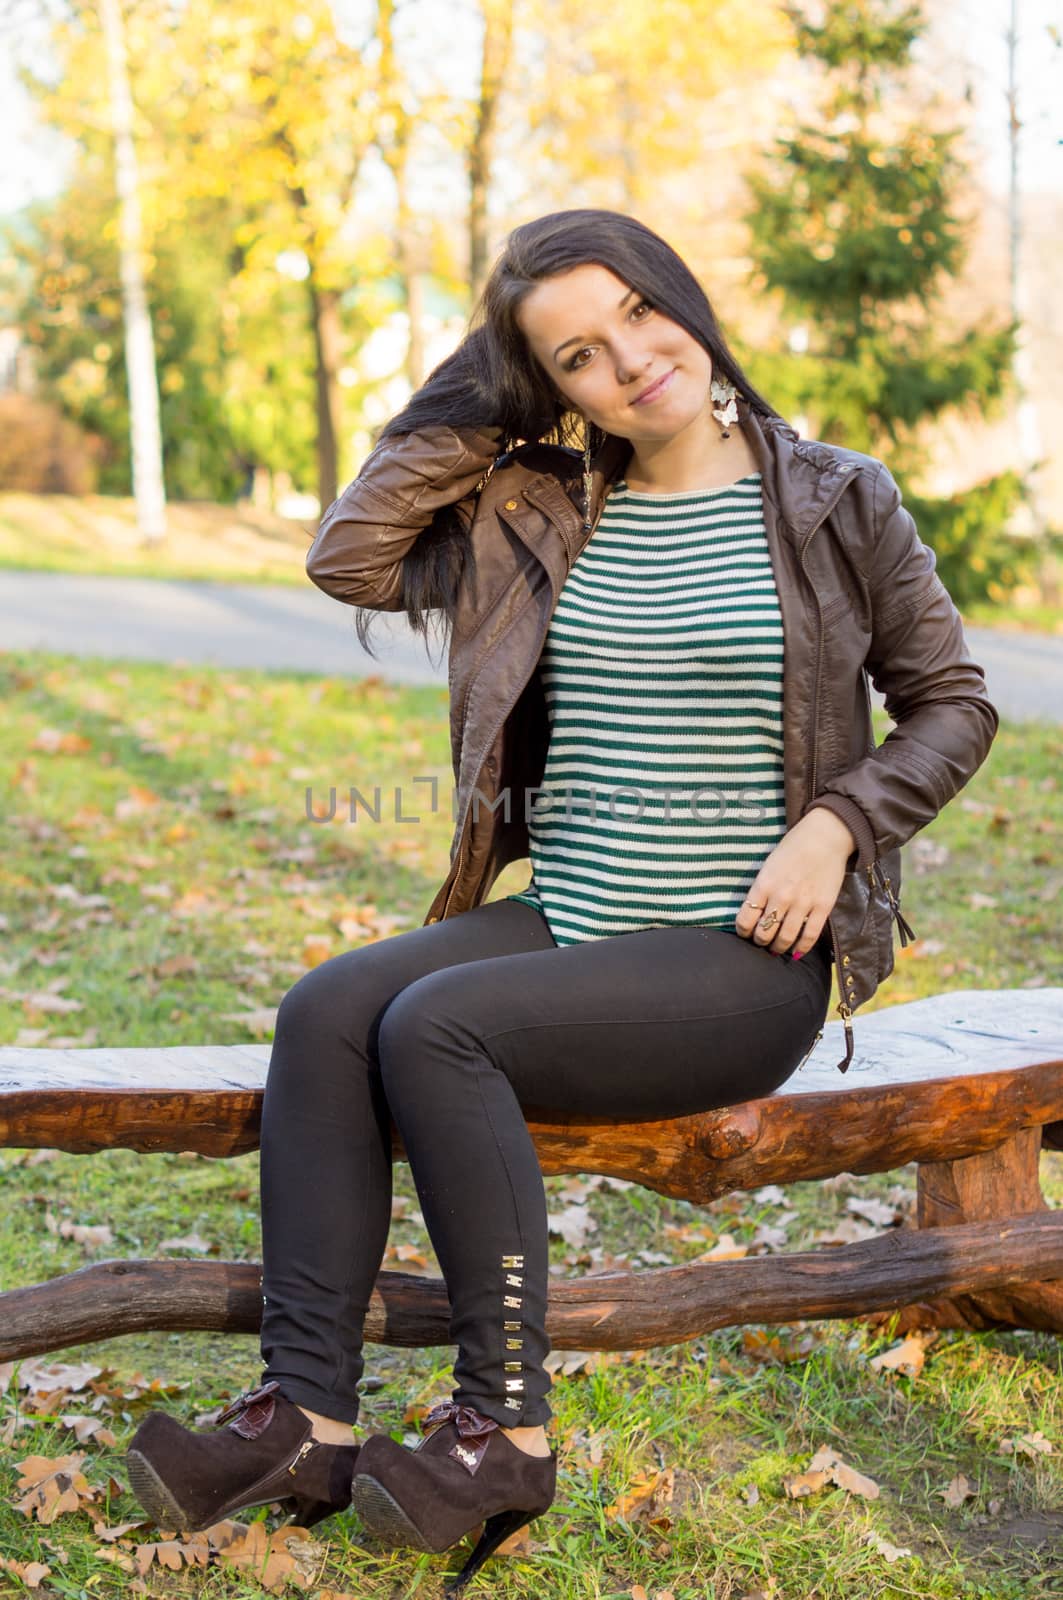 beautiful and sexy girl sitting on bench outdoors. 